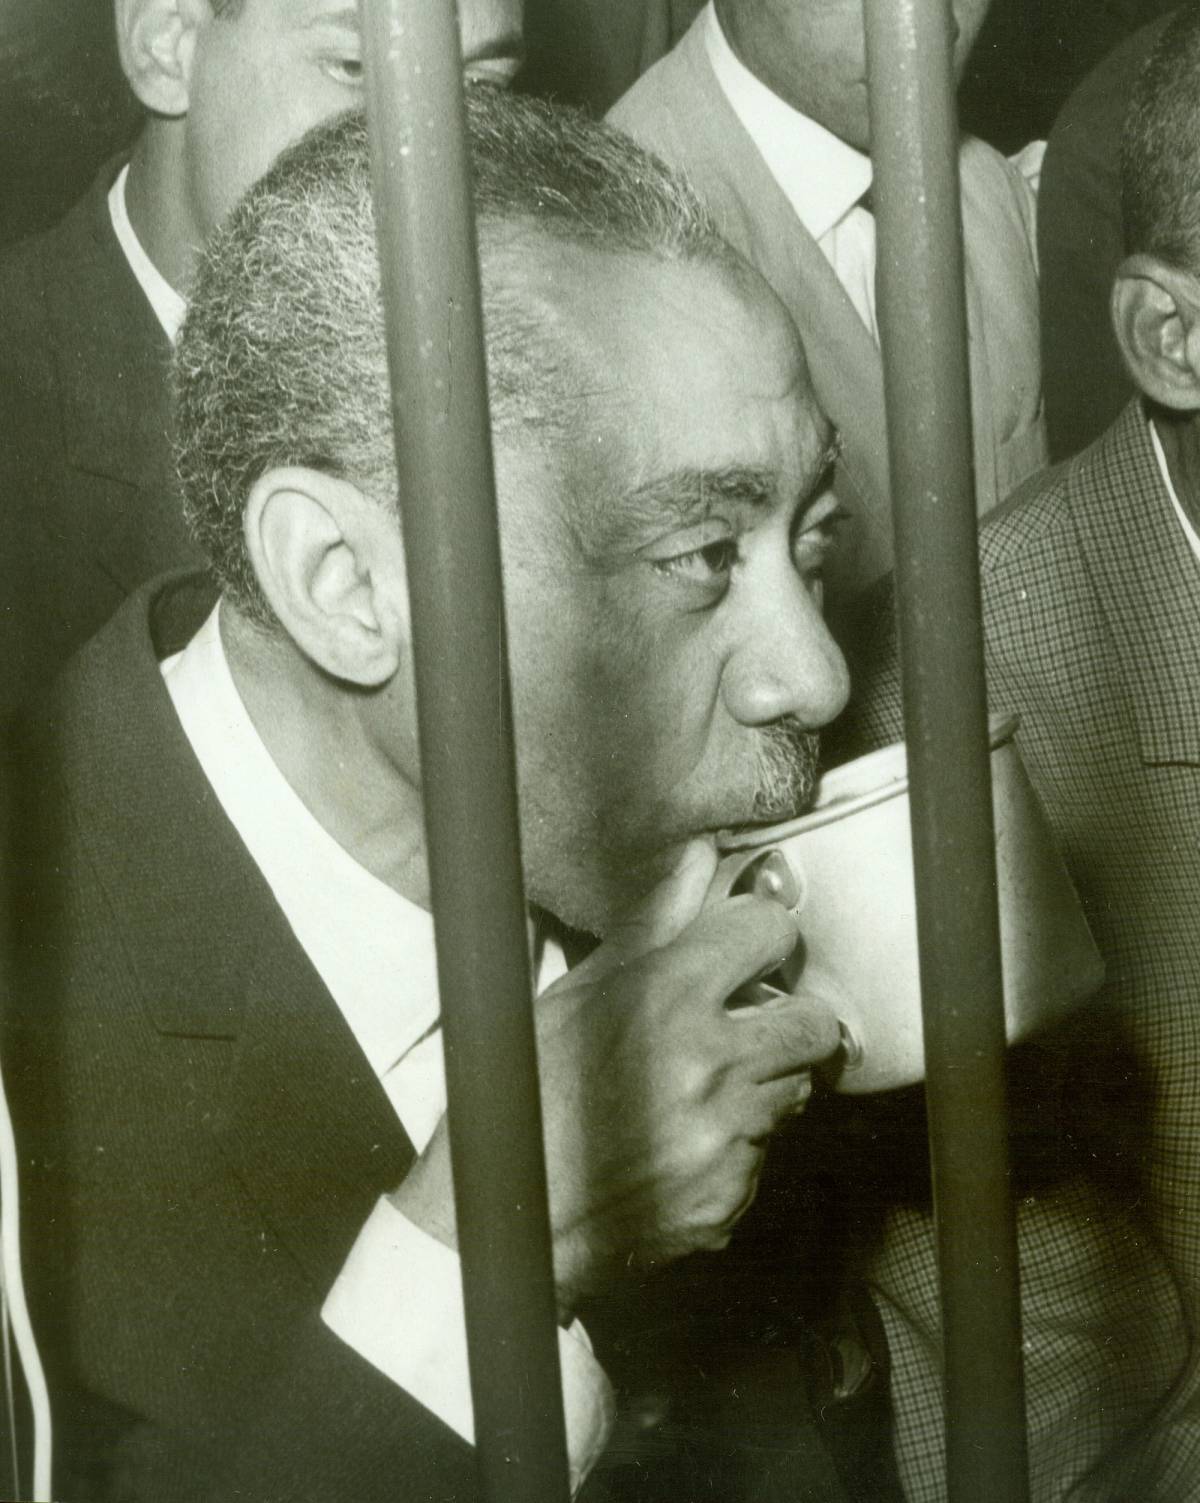 Sayyed Qutb behind bars in 1966, afer he was convicted of plotting the assassination of Egyptian President Gamal Abdel Nasser. He was hanged, and later came to be remembered as the ideological founder of Islamist jihadis.